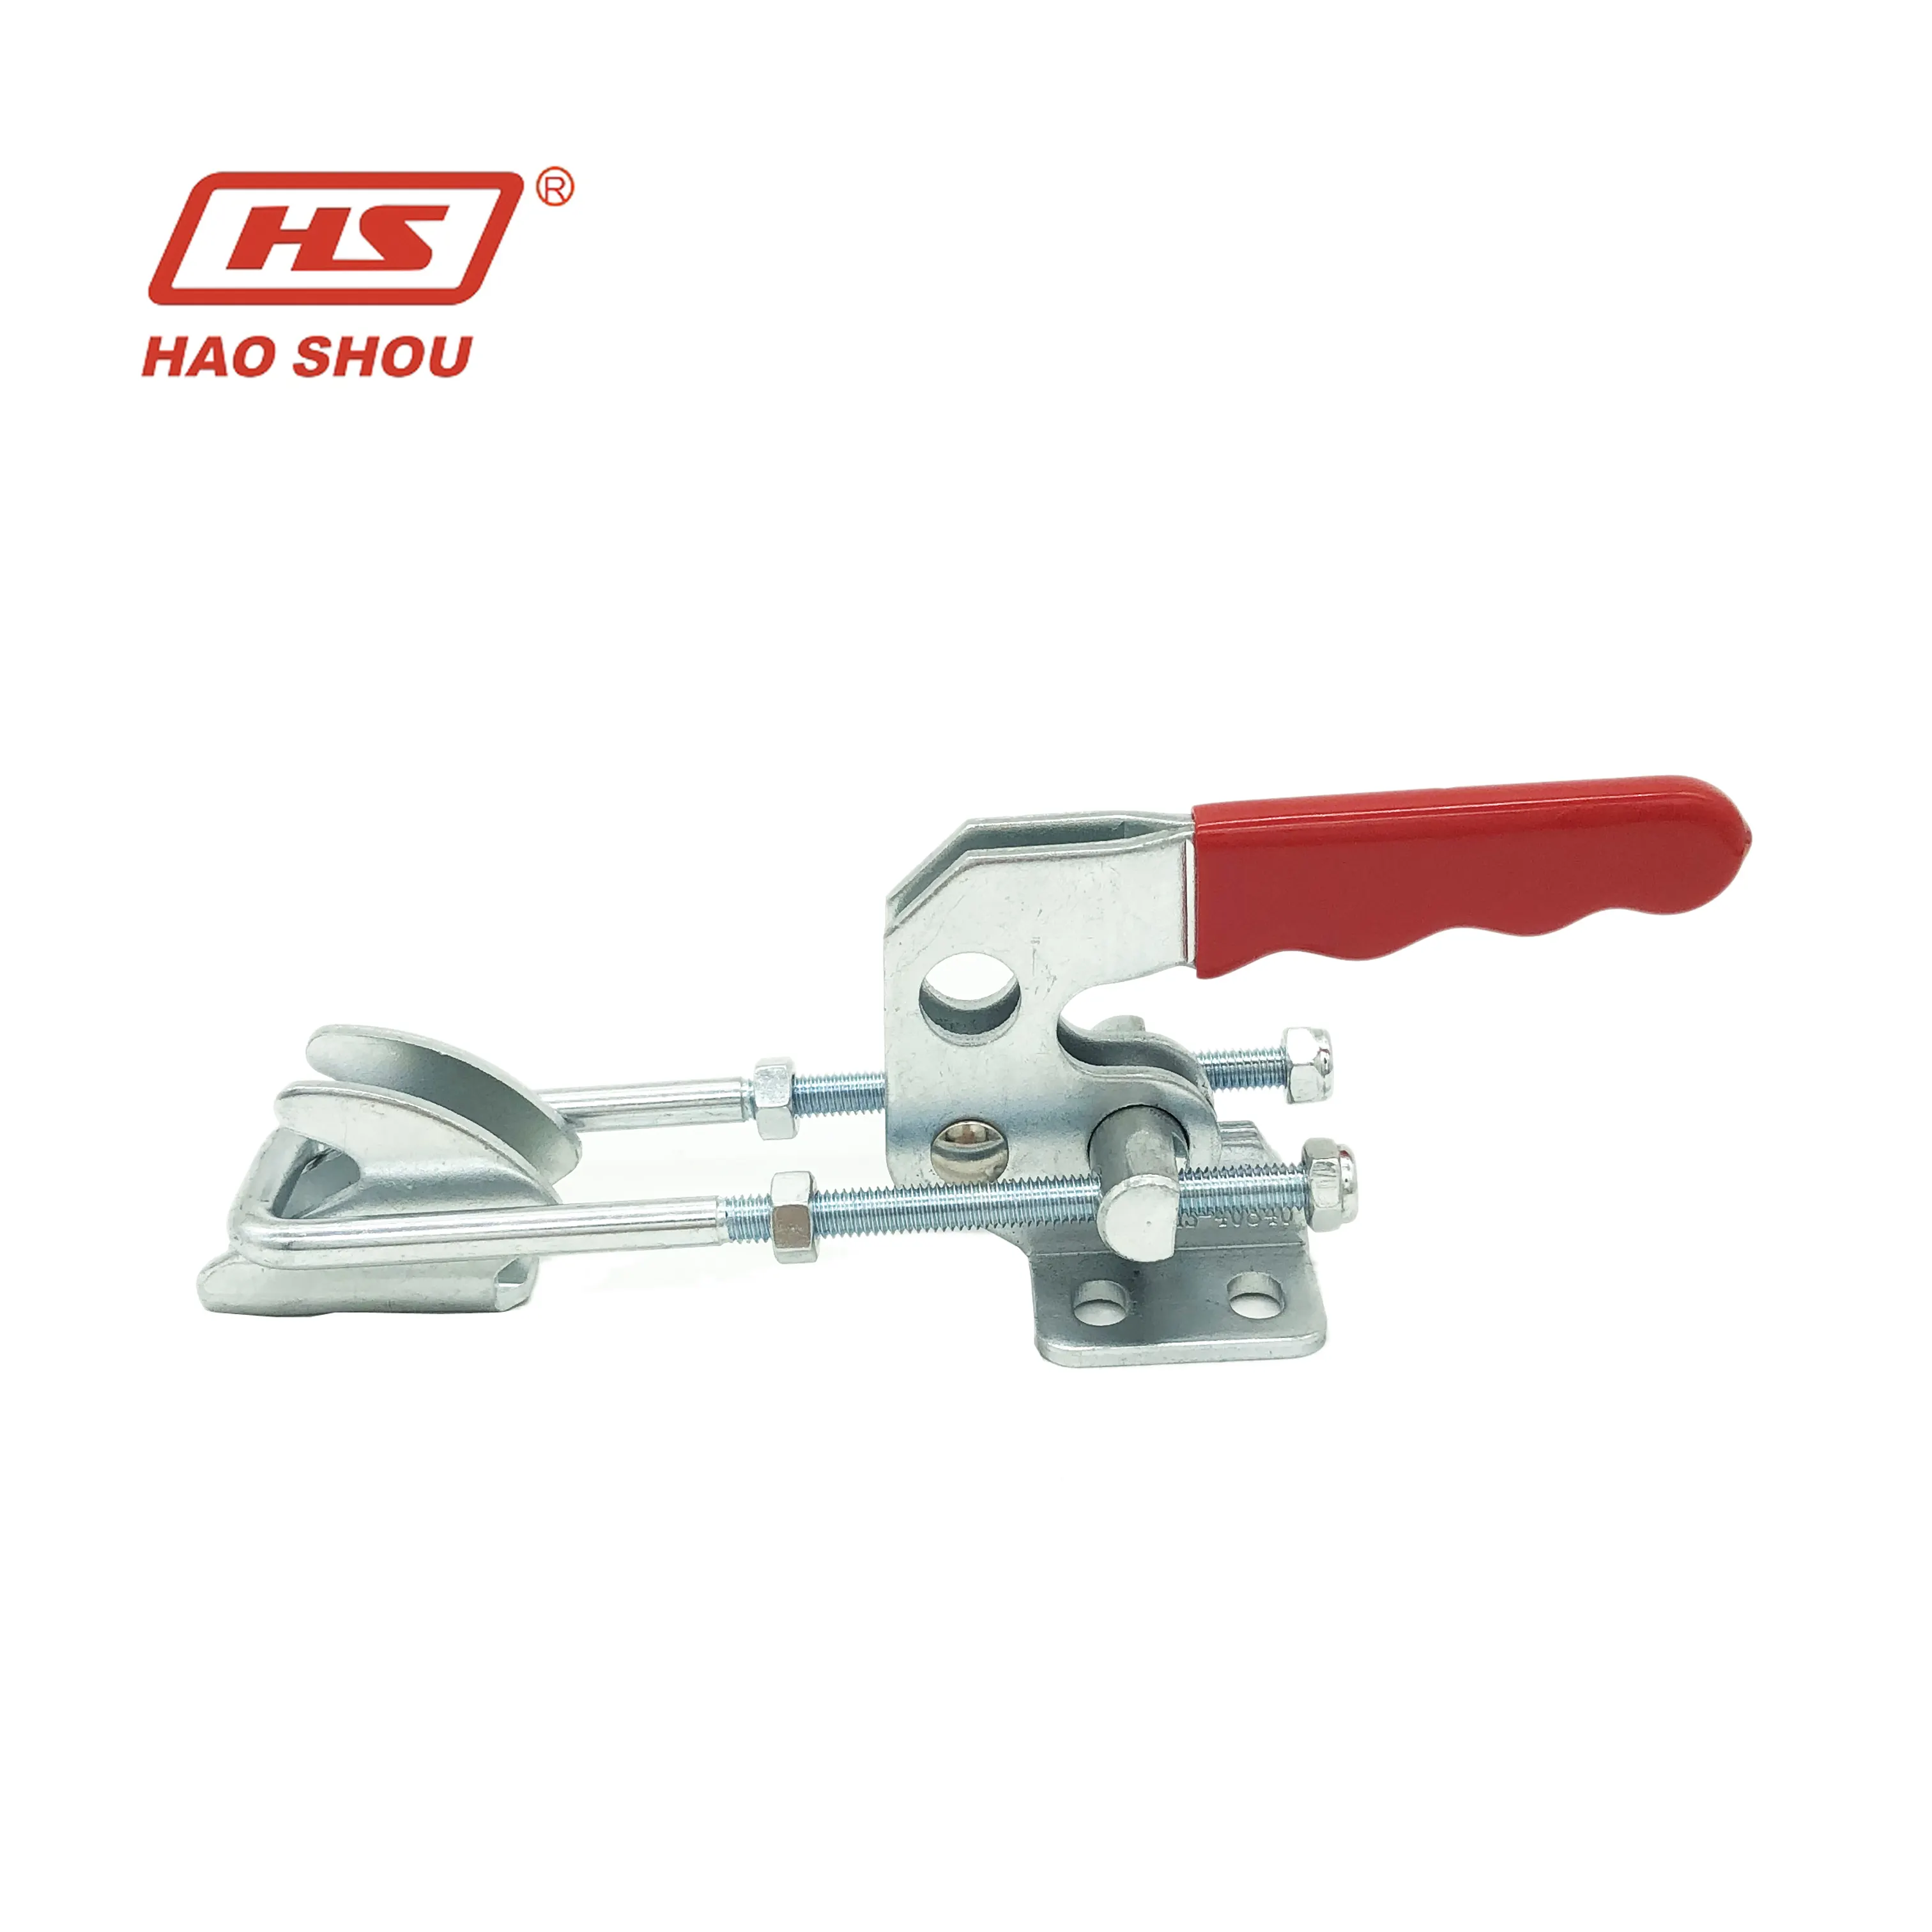 400kg/880LB clamp supplier Haoshou manual zinc-plated latch type toggle clamp HS-40840 for fixtures